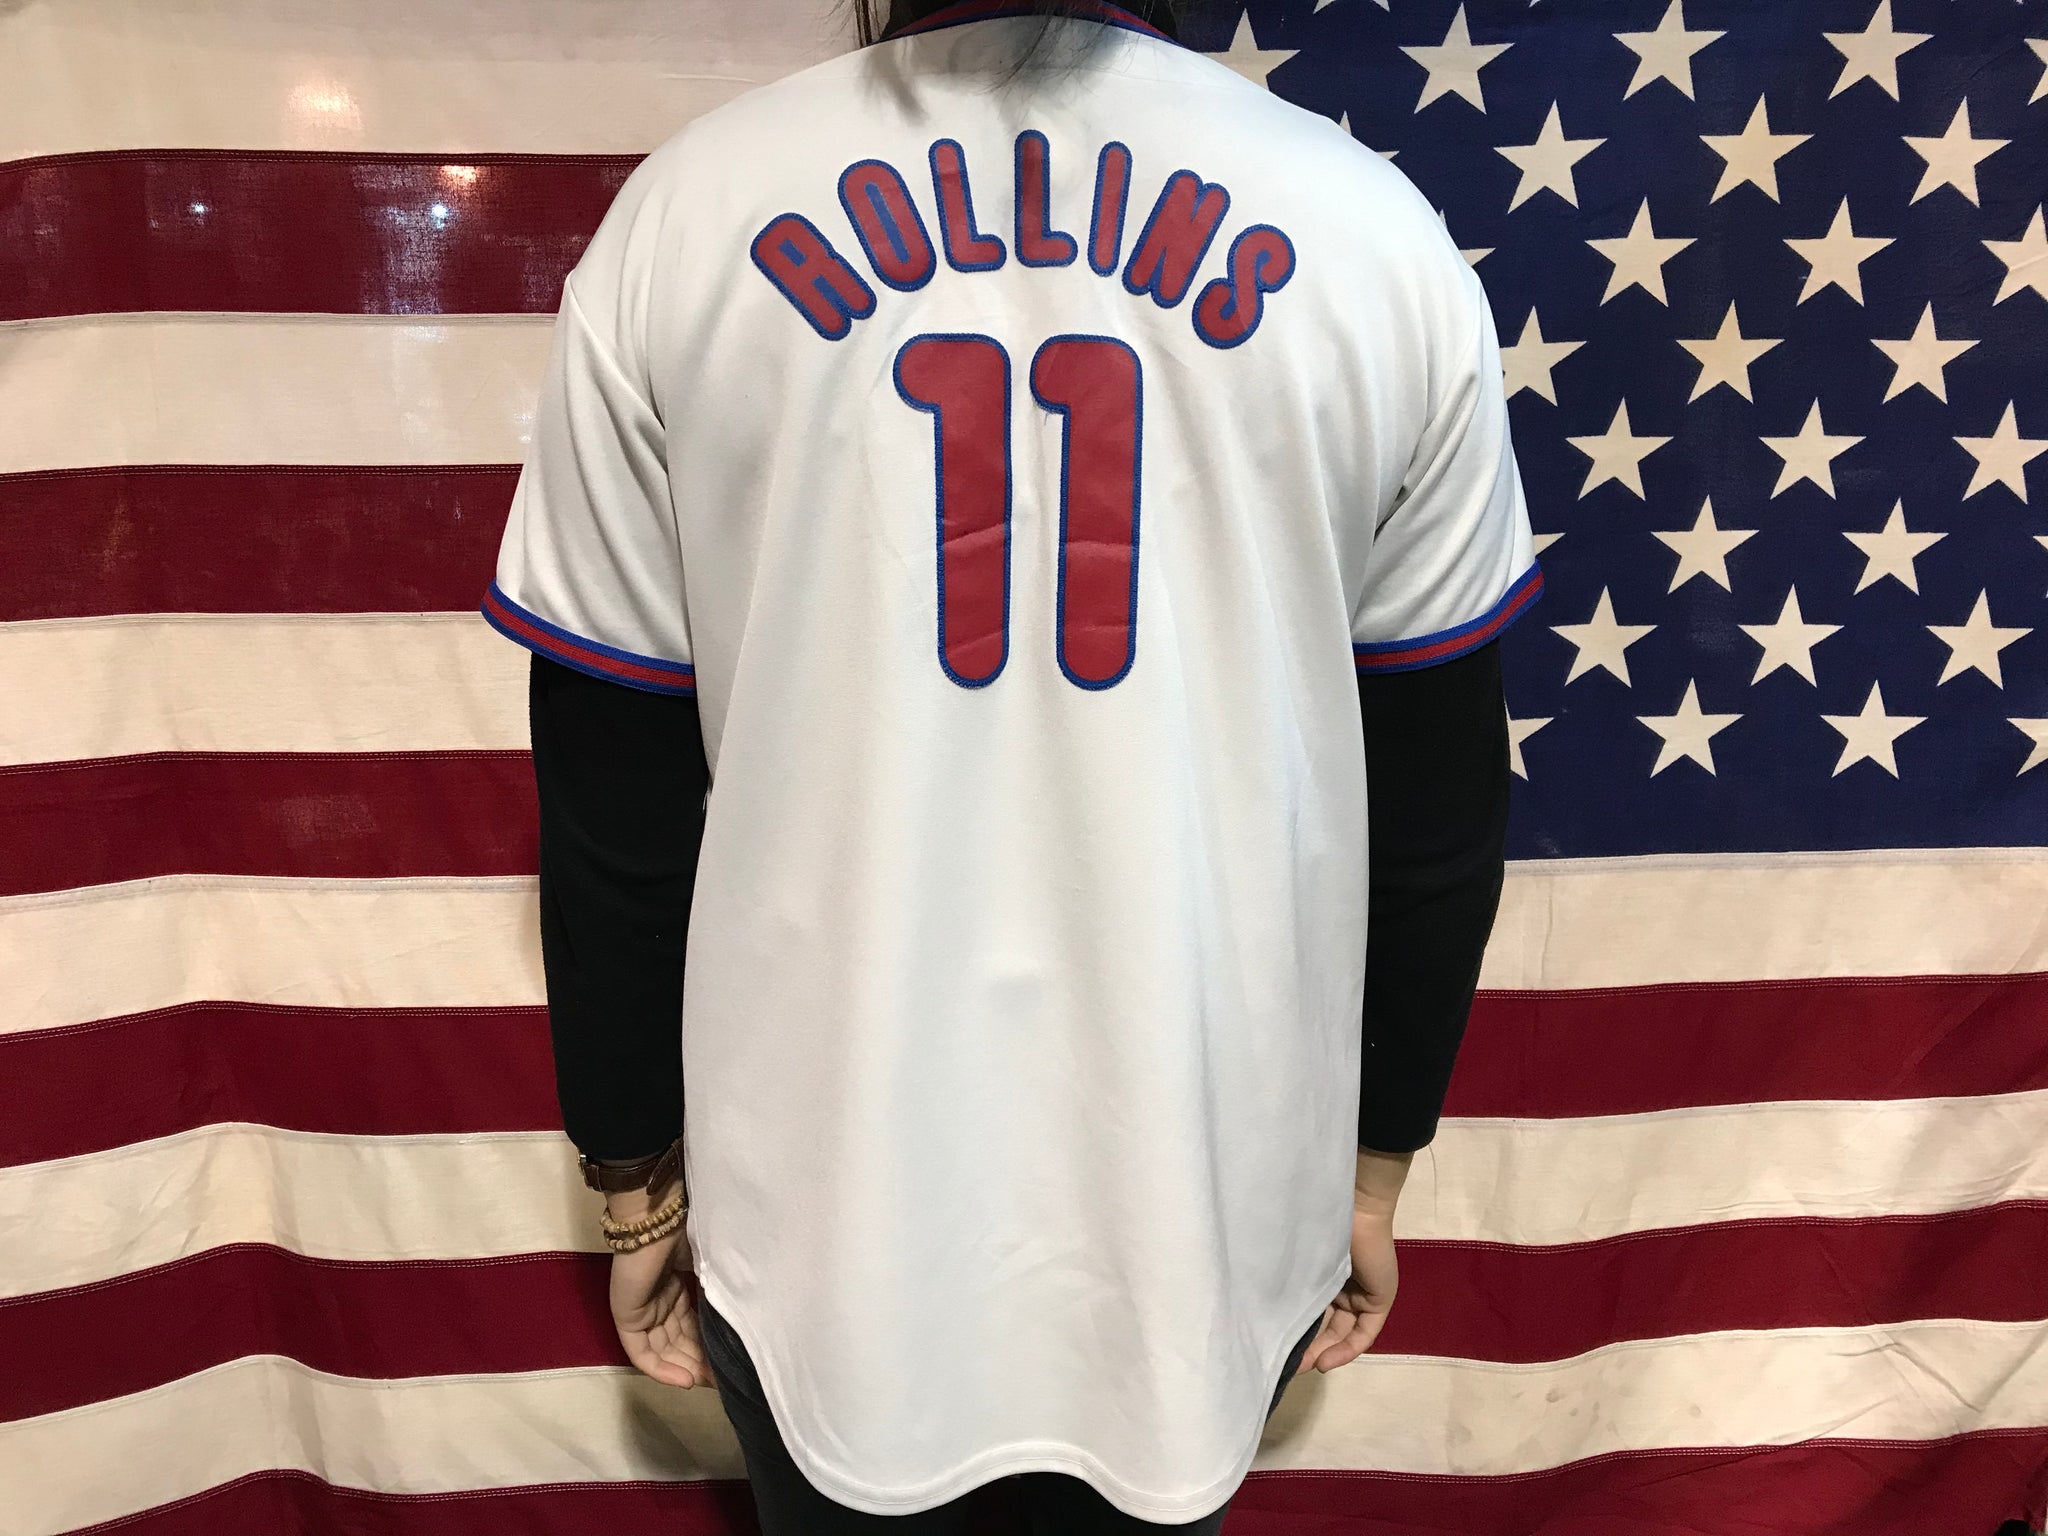 Phillies Baseball Vintage Jersey Player Rollins No 11 by Majestic